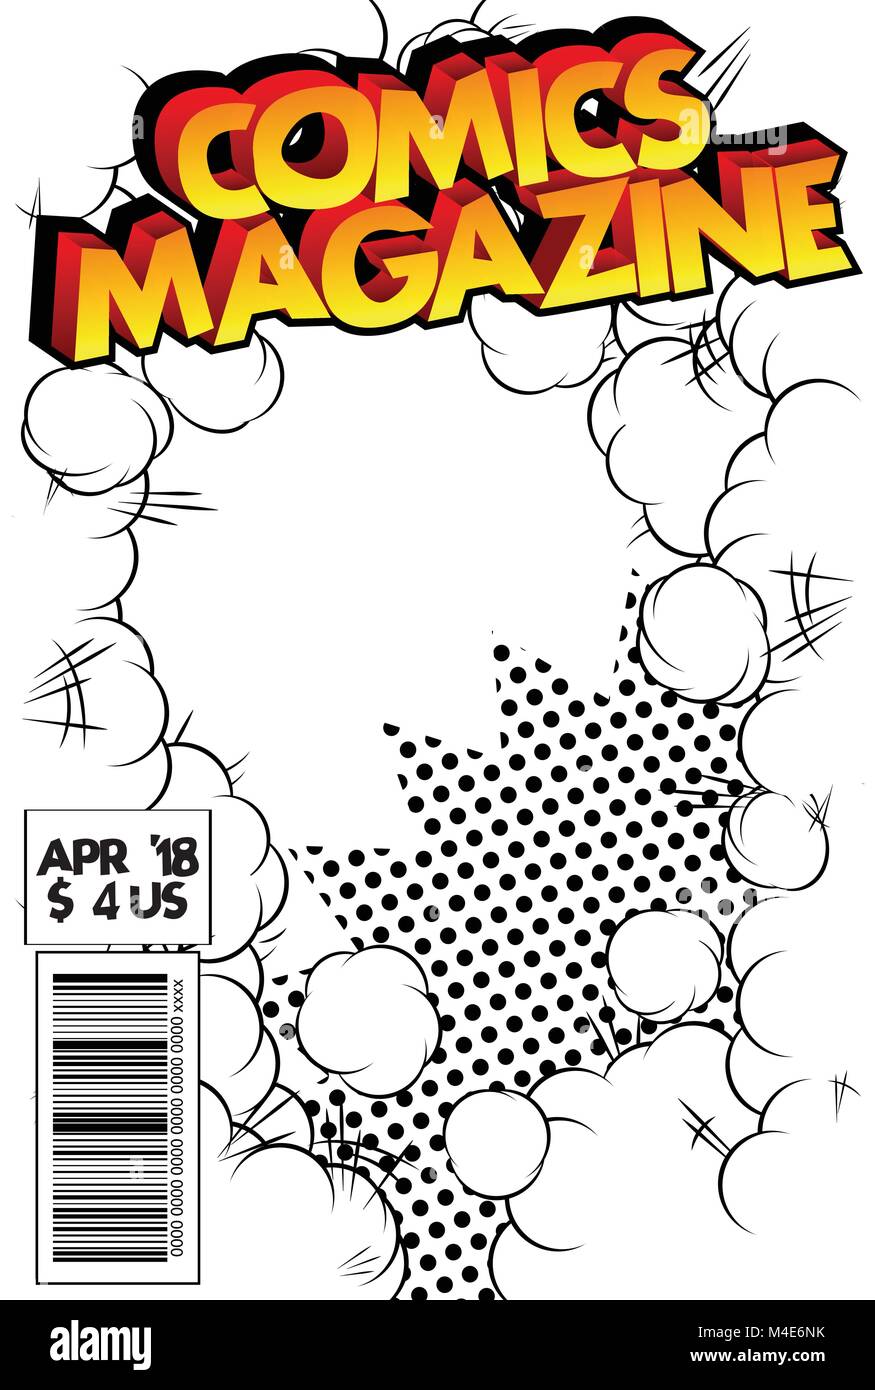 Comic Book Covers Template from c8.alamy.com